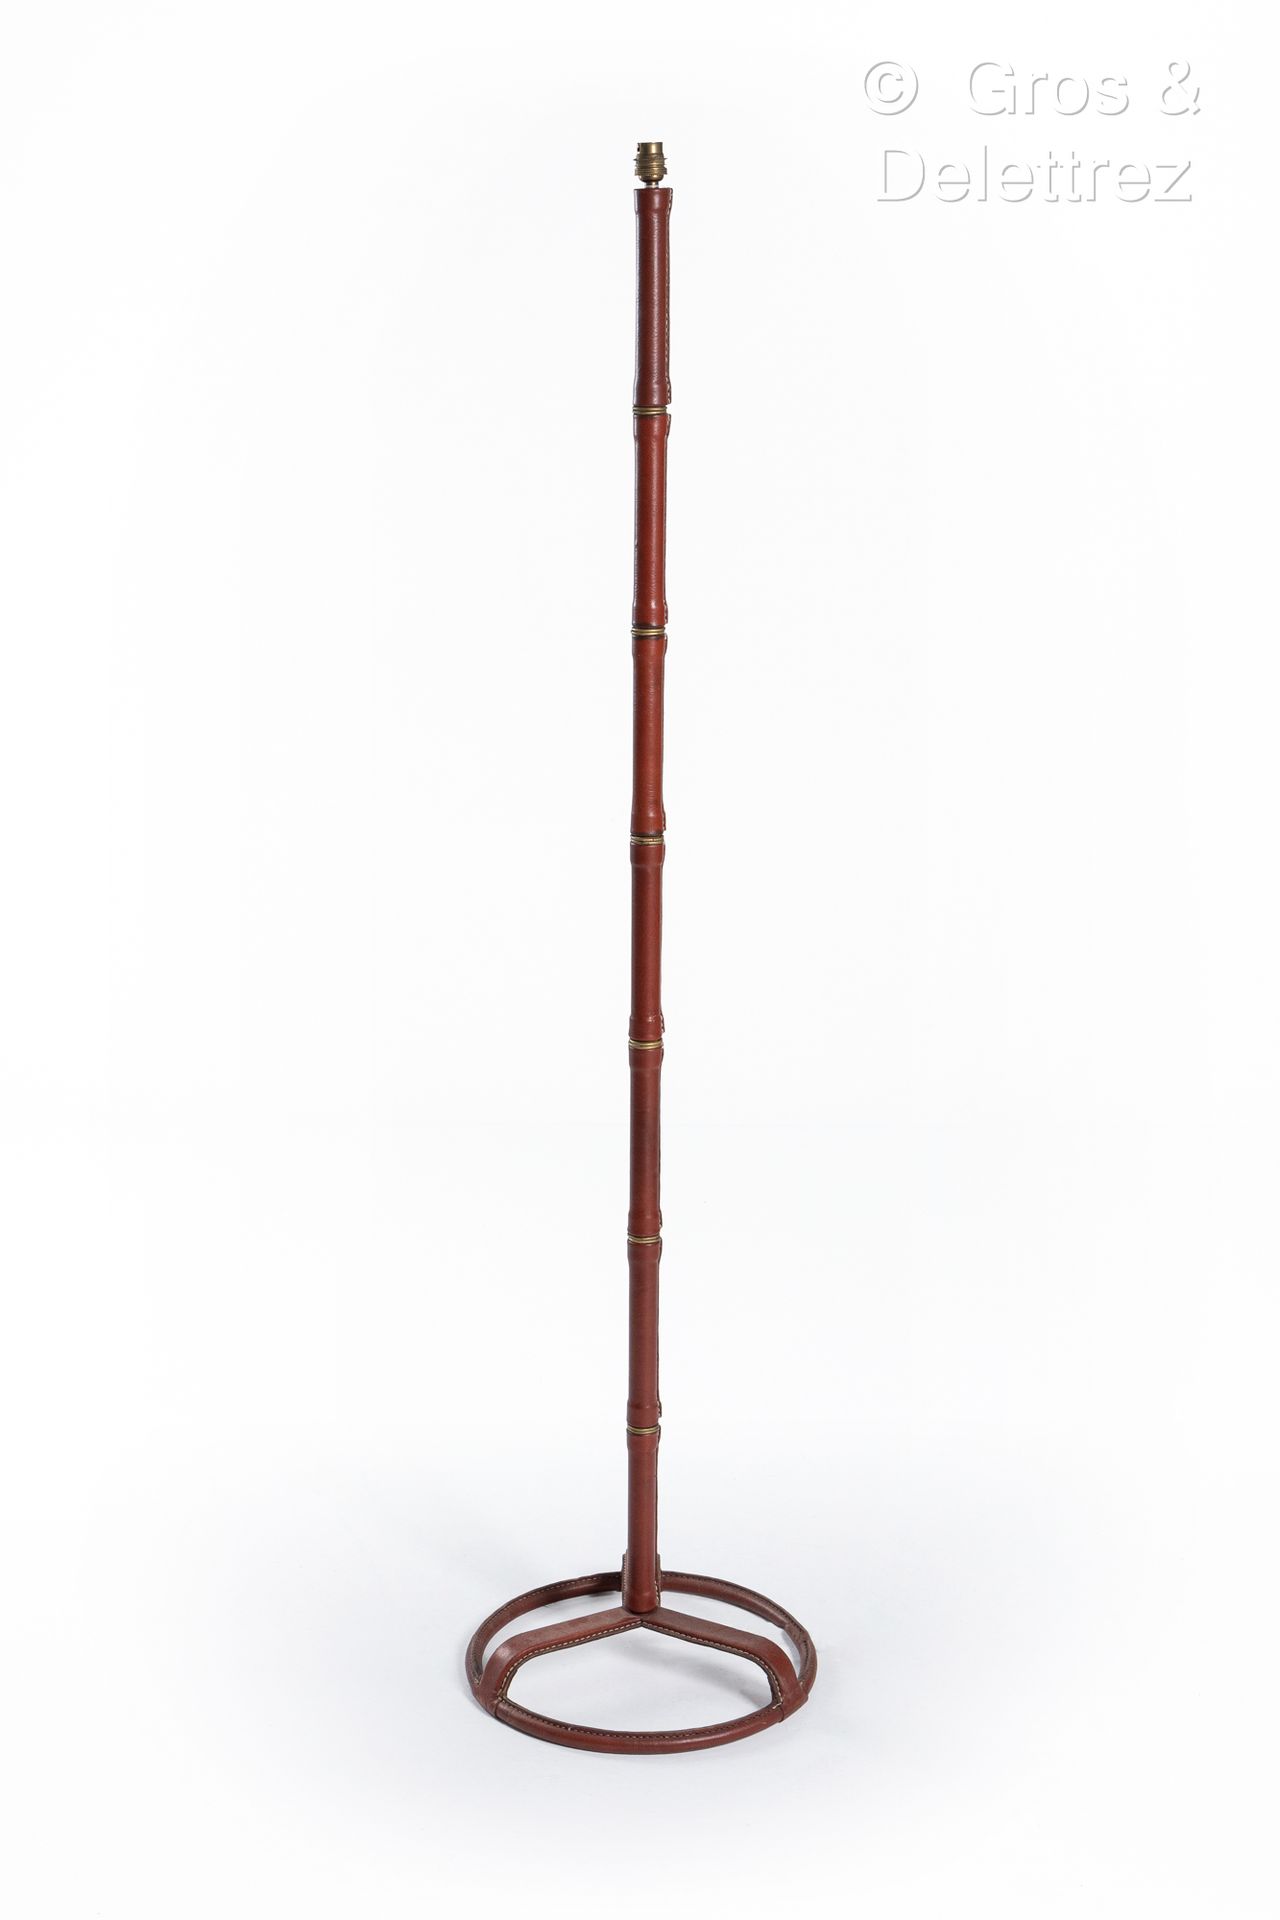 Null Jacques ADNET (1900-1984)
Floor lamp with tubular shaft entirely sheathed i&hellip;